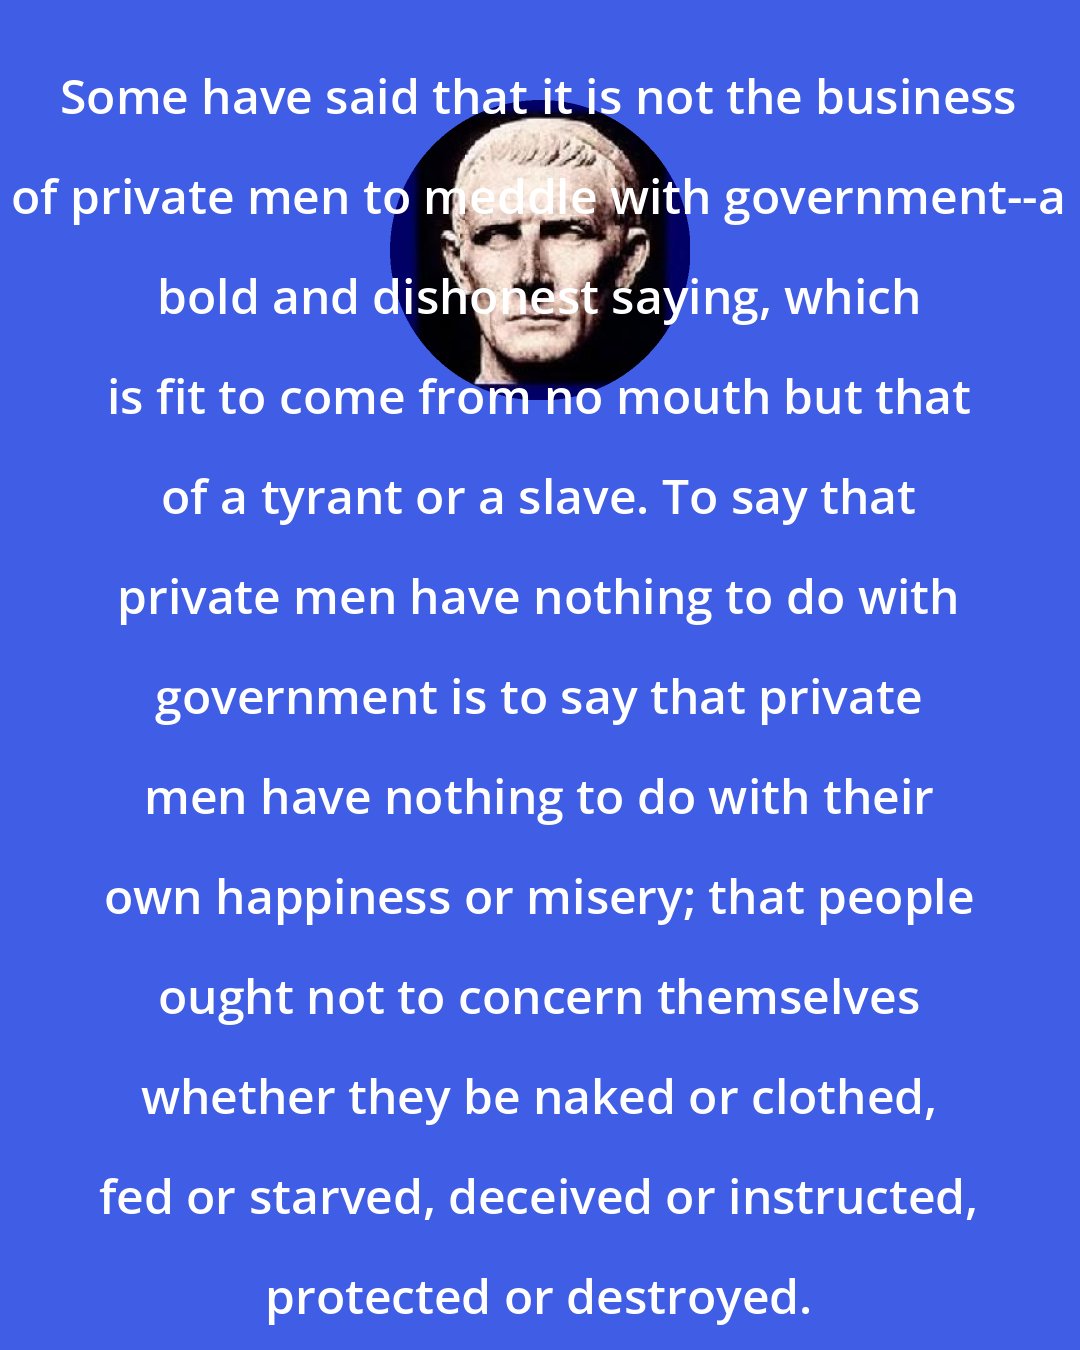 Cato the Younger: Some have said that it is not the business of private men to meddle with government--a bold and dishonest saying, which is fit to come from no mouth but that of a tyrant or a slave. To say that private men have nothing to do with government is to say that private men have nothing to do with their own happiness or misery; that people ought not to concern themselves whether they be naked or clothed, fed or starved, deceived or instructed, protected or destroyed.